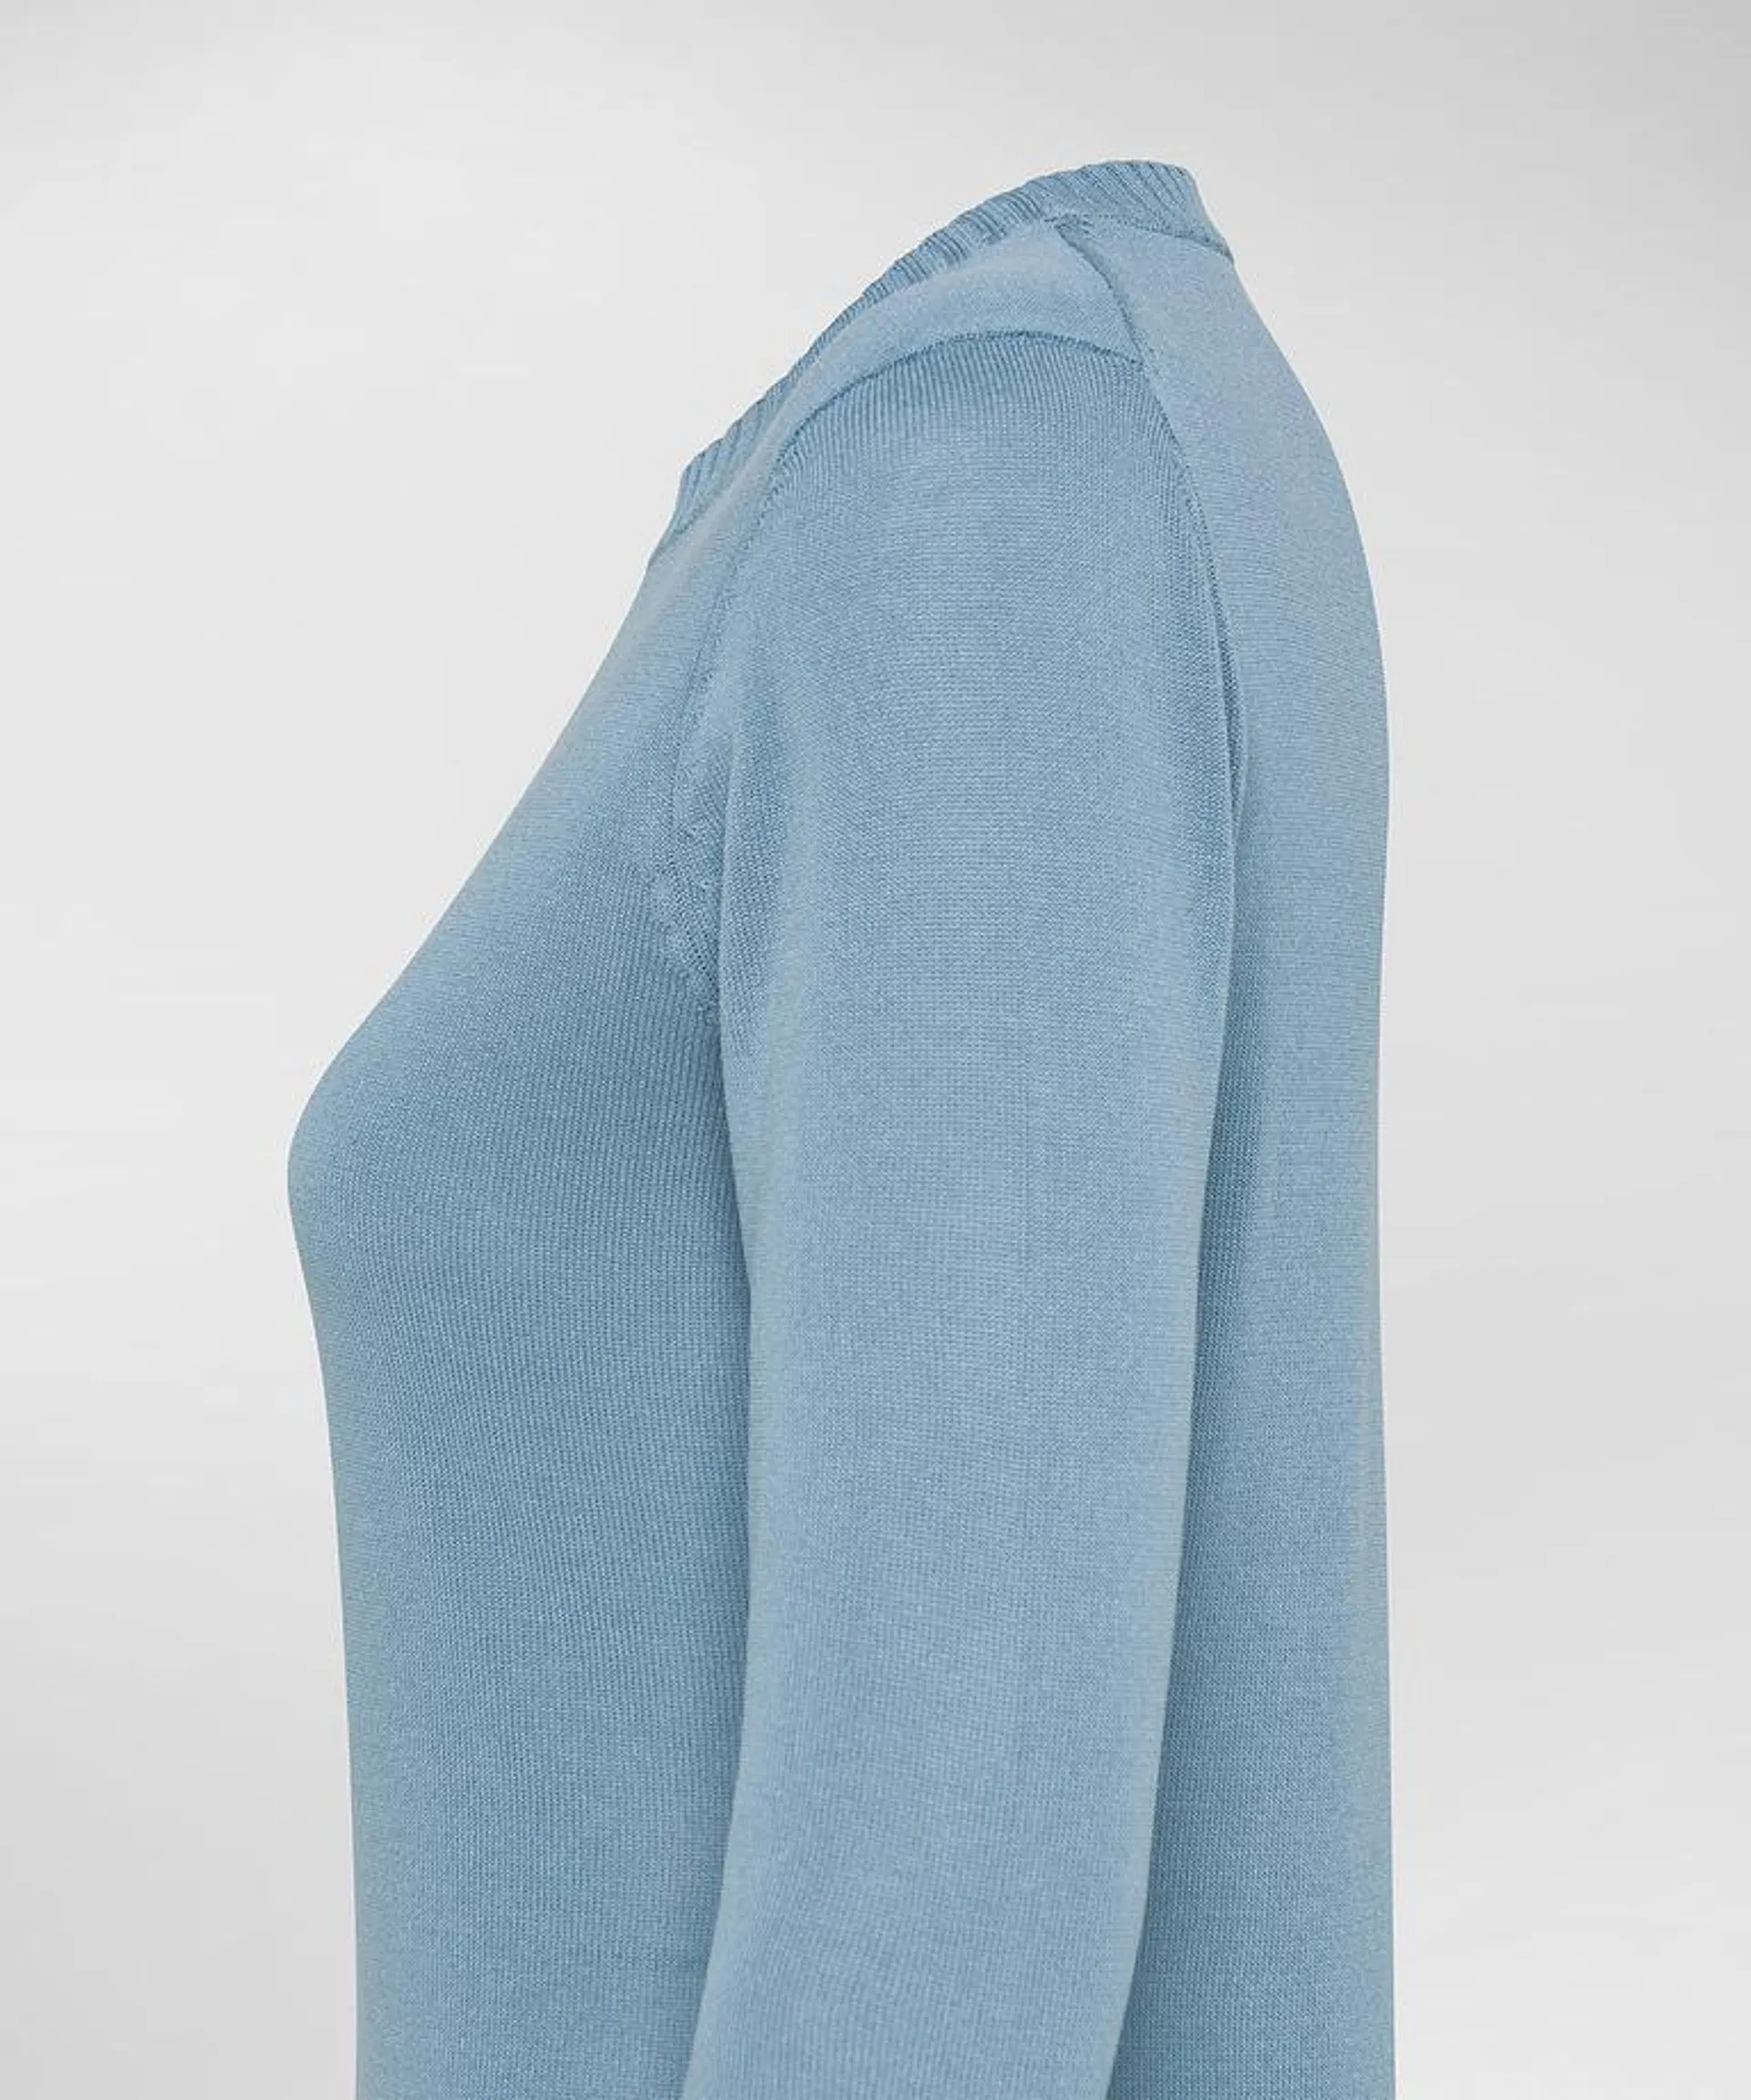 Crew neck sweater with contrasting cuffs